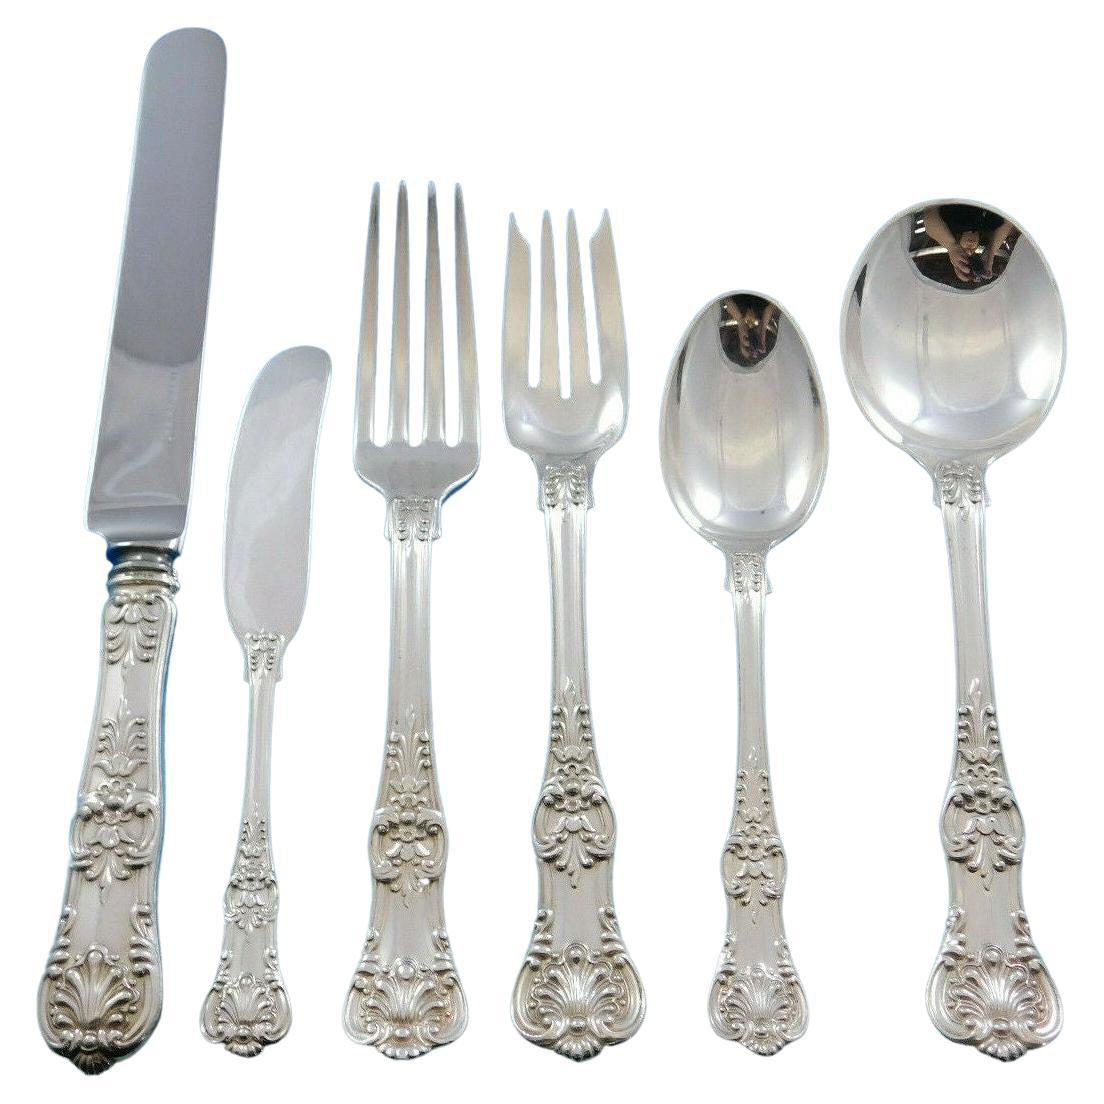 English King by Tiffany and Co. Sterling Silver Flatware Set 12 Service 74 Pcs